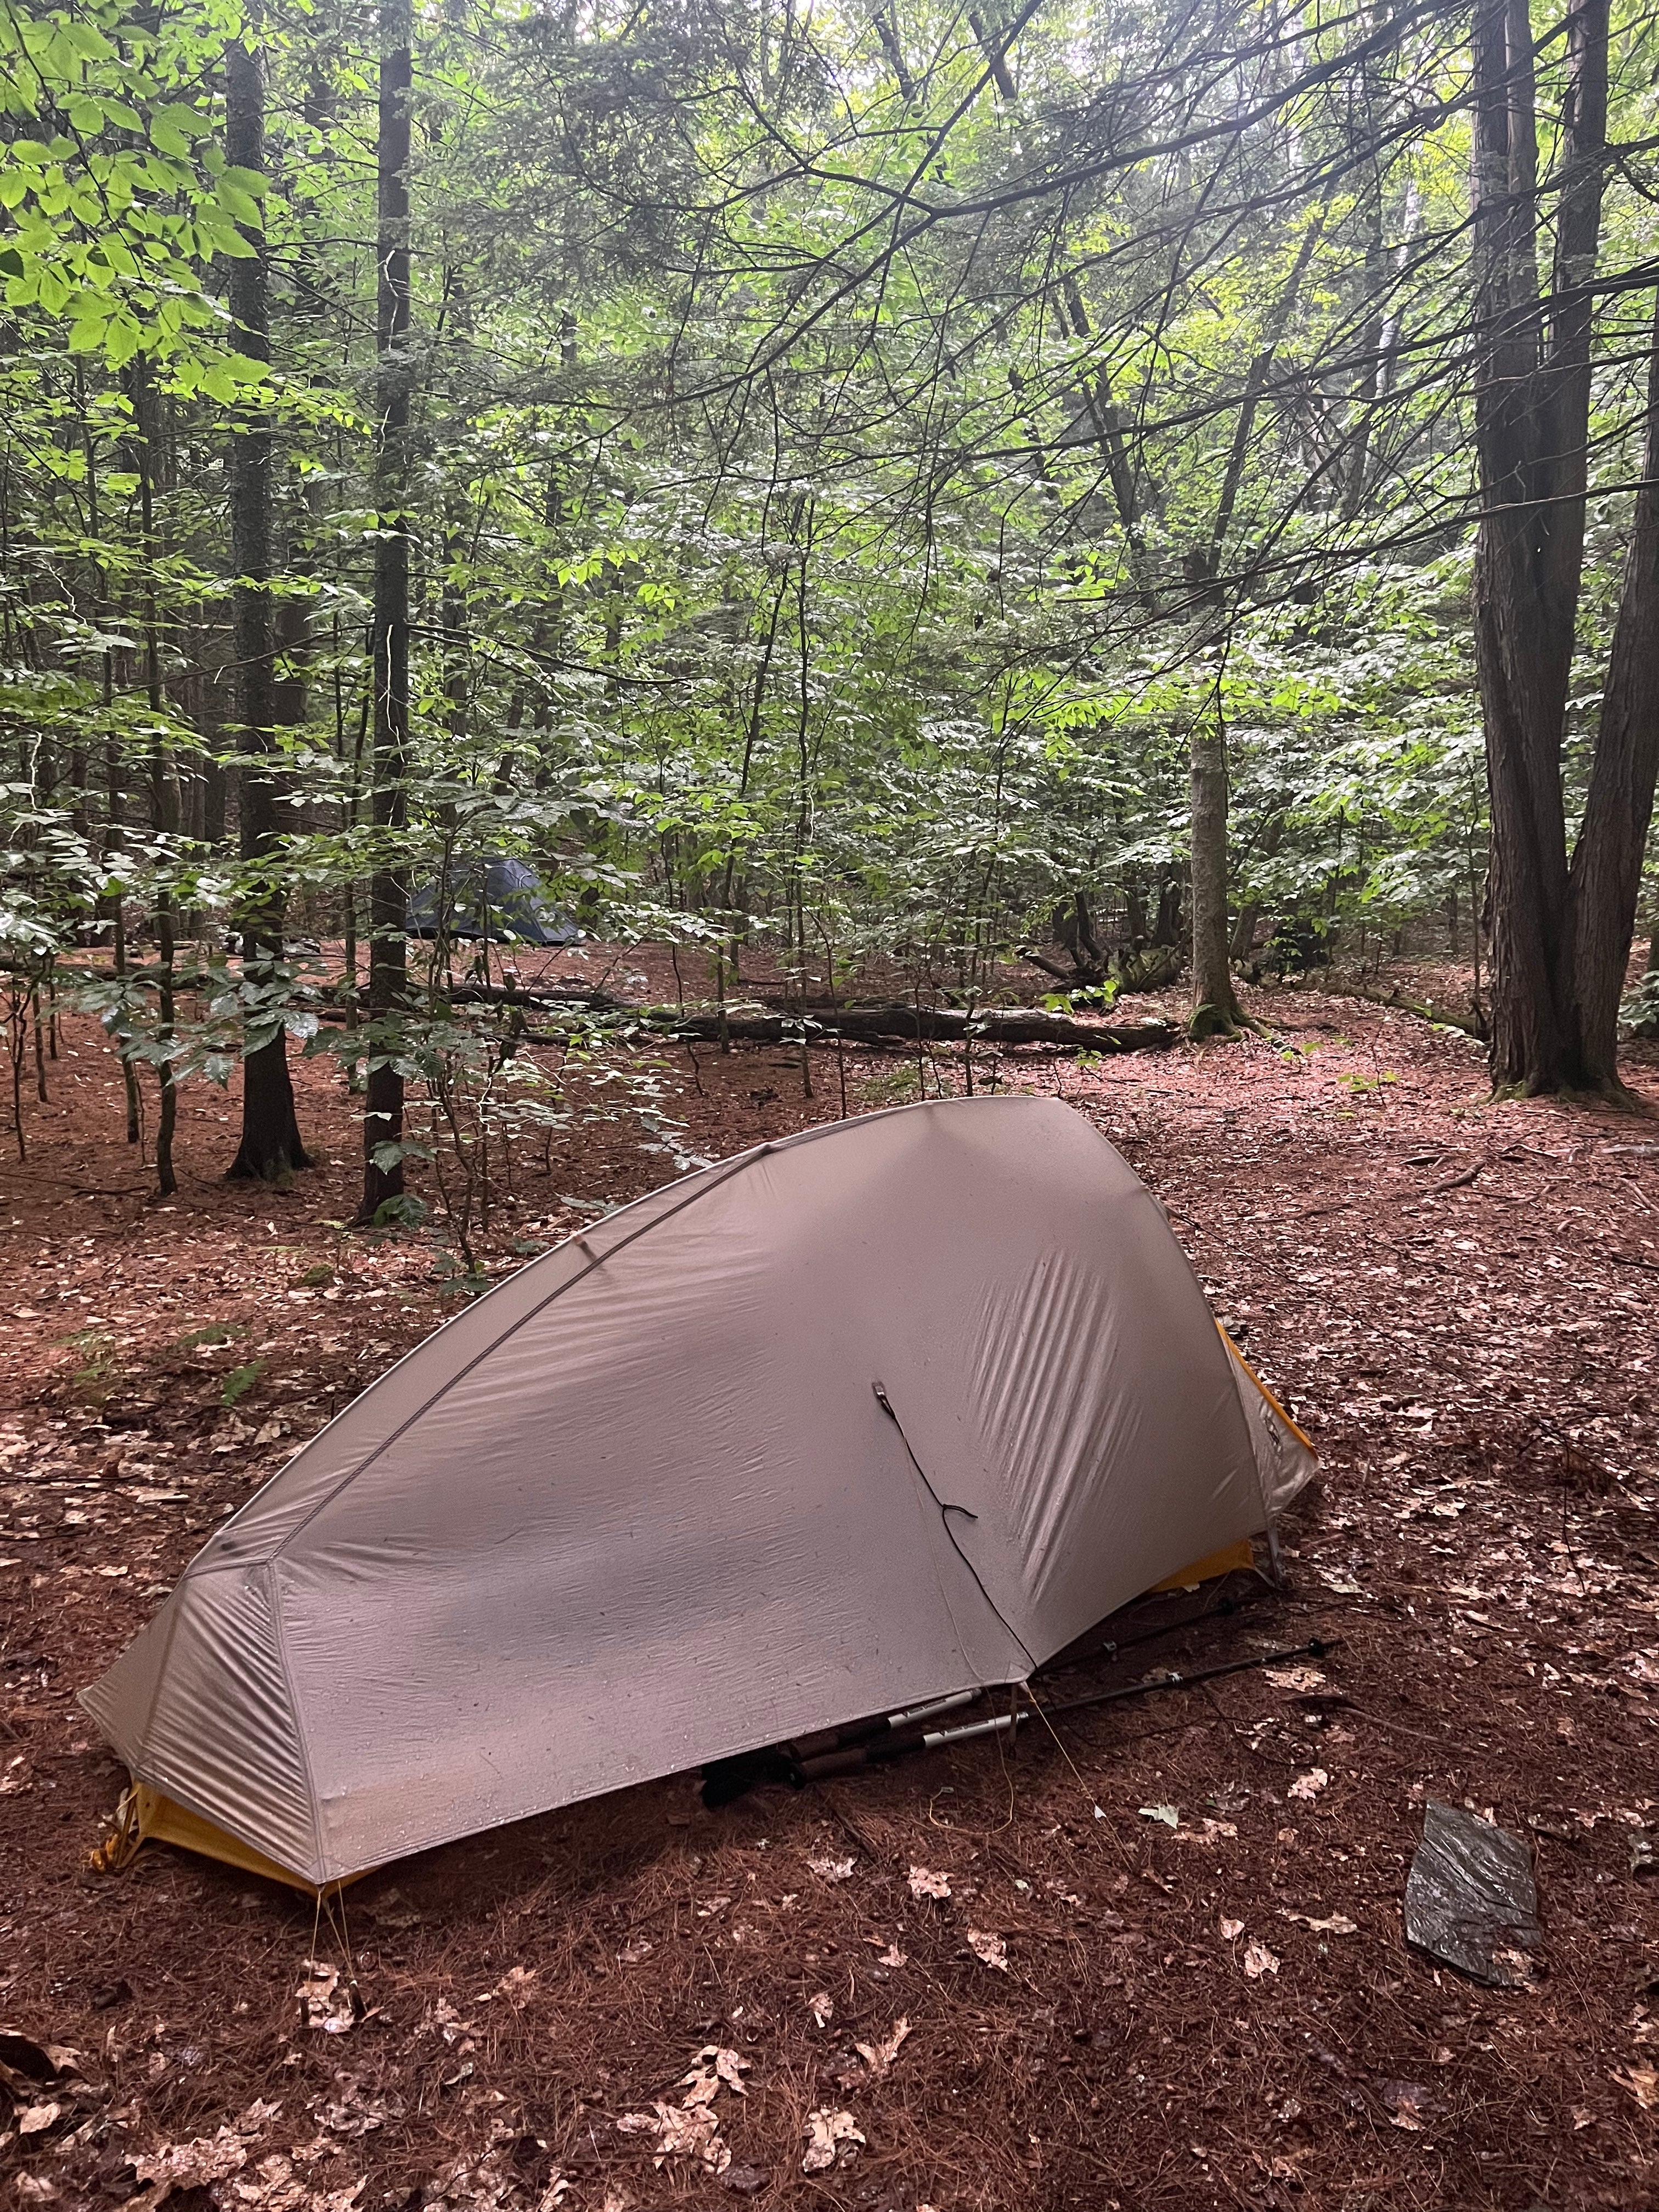 Camper submitted image from Happy Hill Backcountry Shelter on the AT in Vermont — Appalachian National Scenic Trail - 1